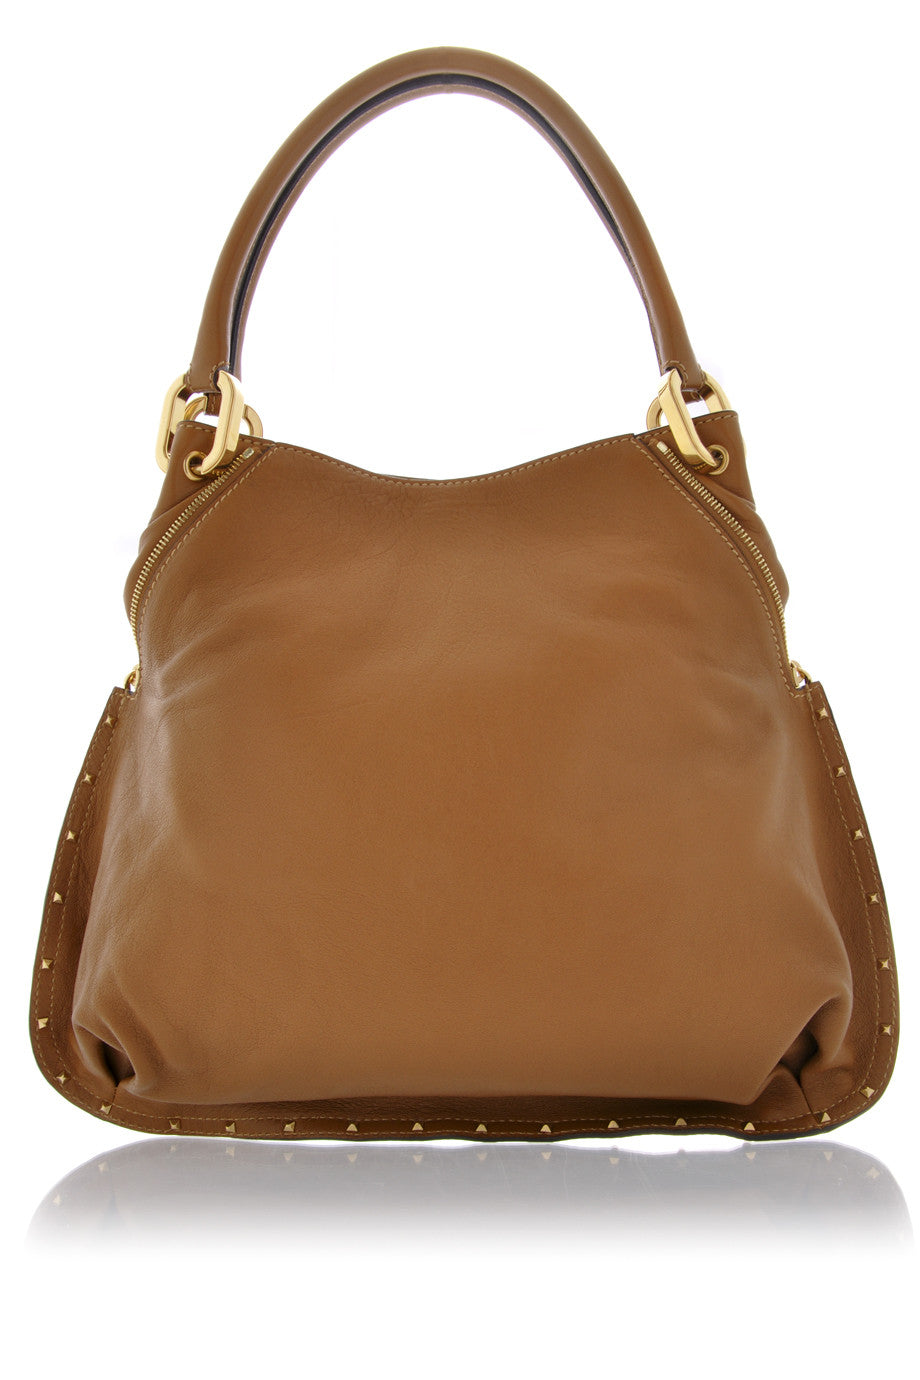 Marc Jacobs Pebbled Leather Tote Bag